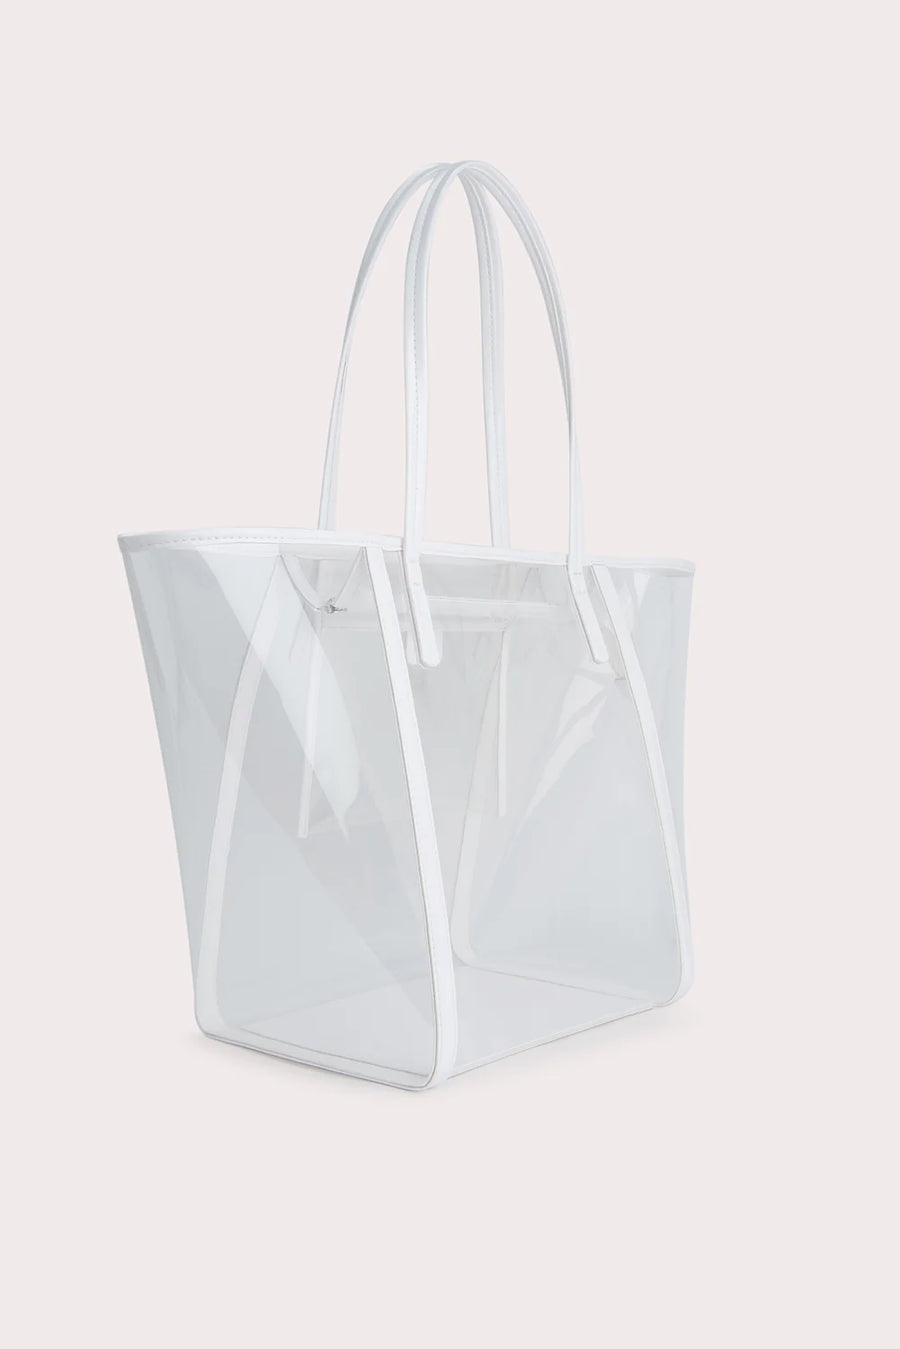 The Club Tote. Inside zip pocket. Made from transparent PU. Slim handles and zip closure.